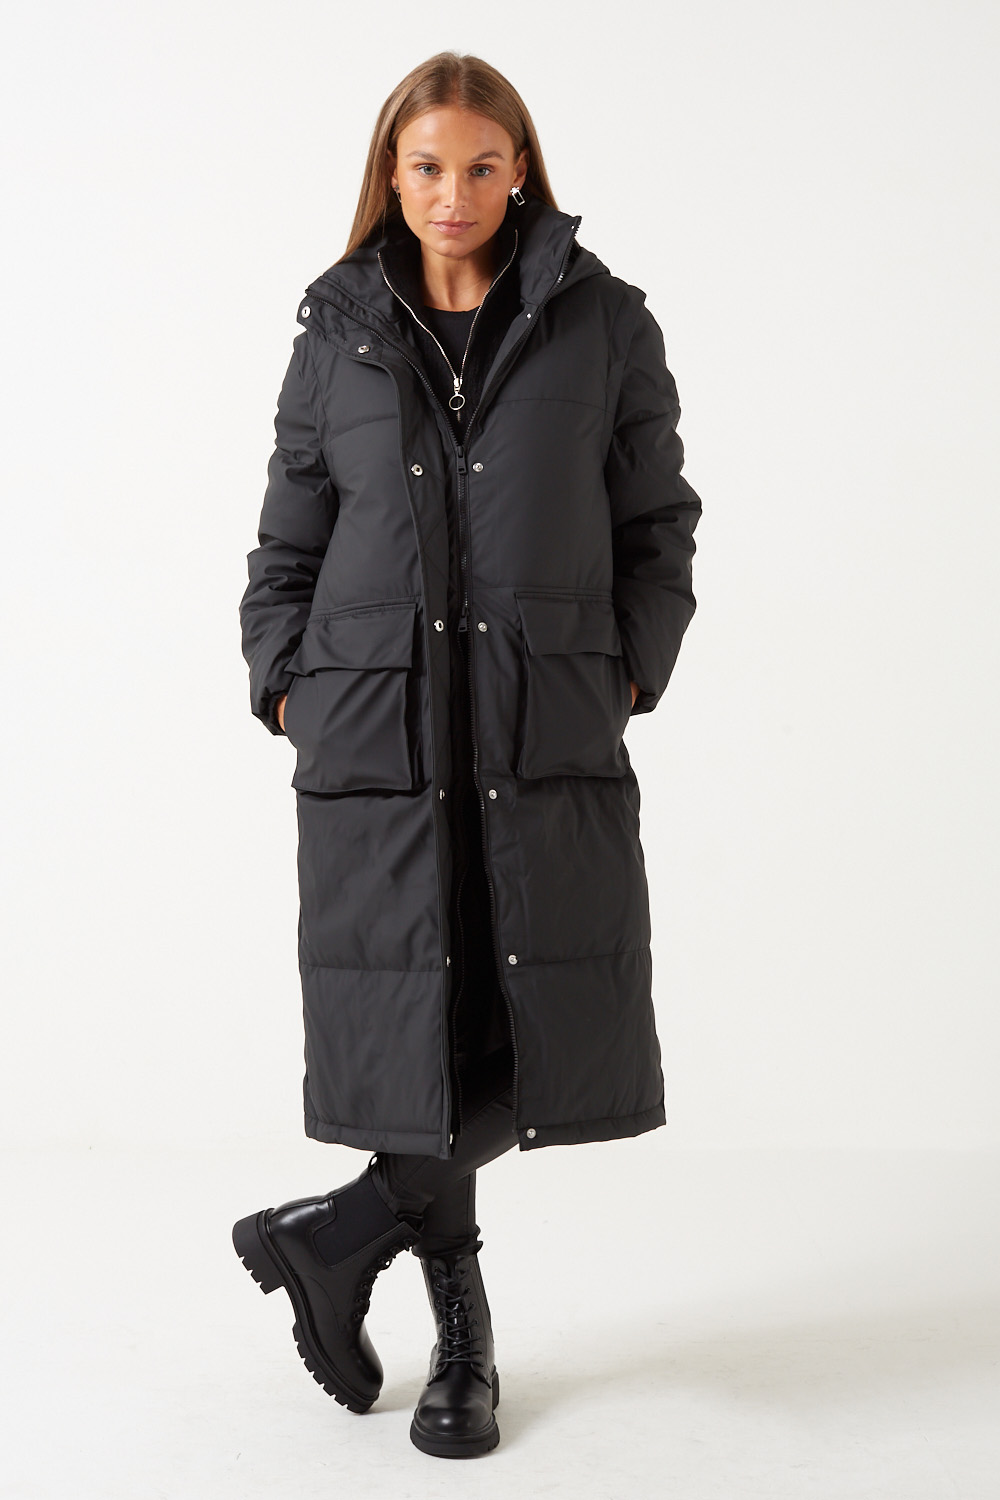 Sally 2-in-1 Puffer and Raincoat in Black - iCLOTHING